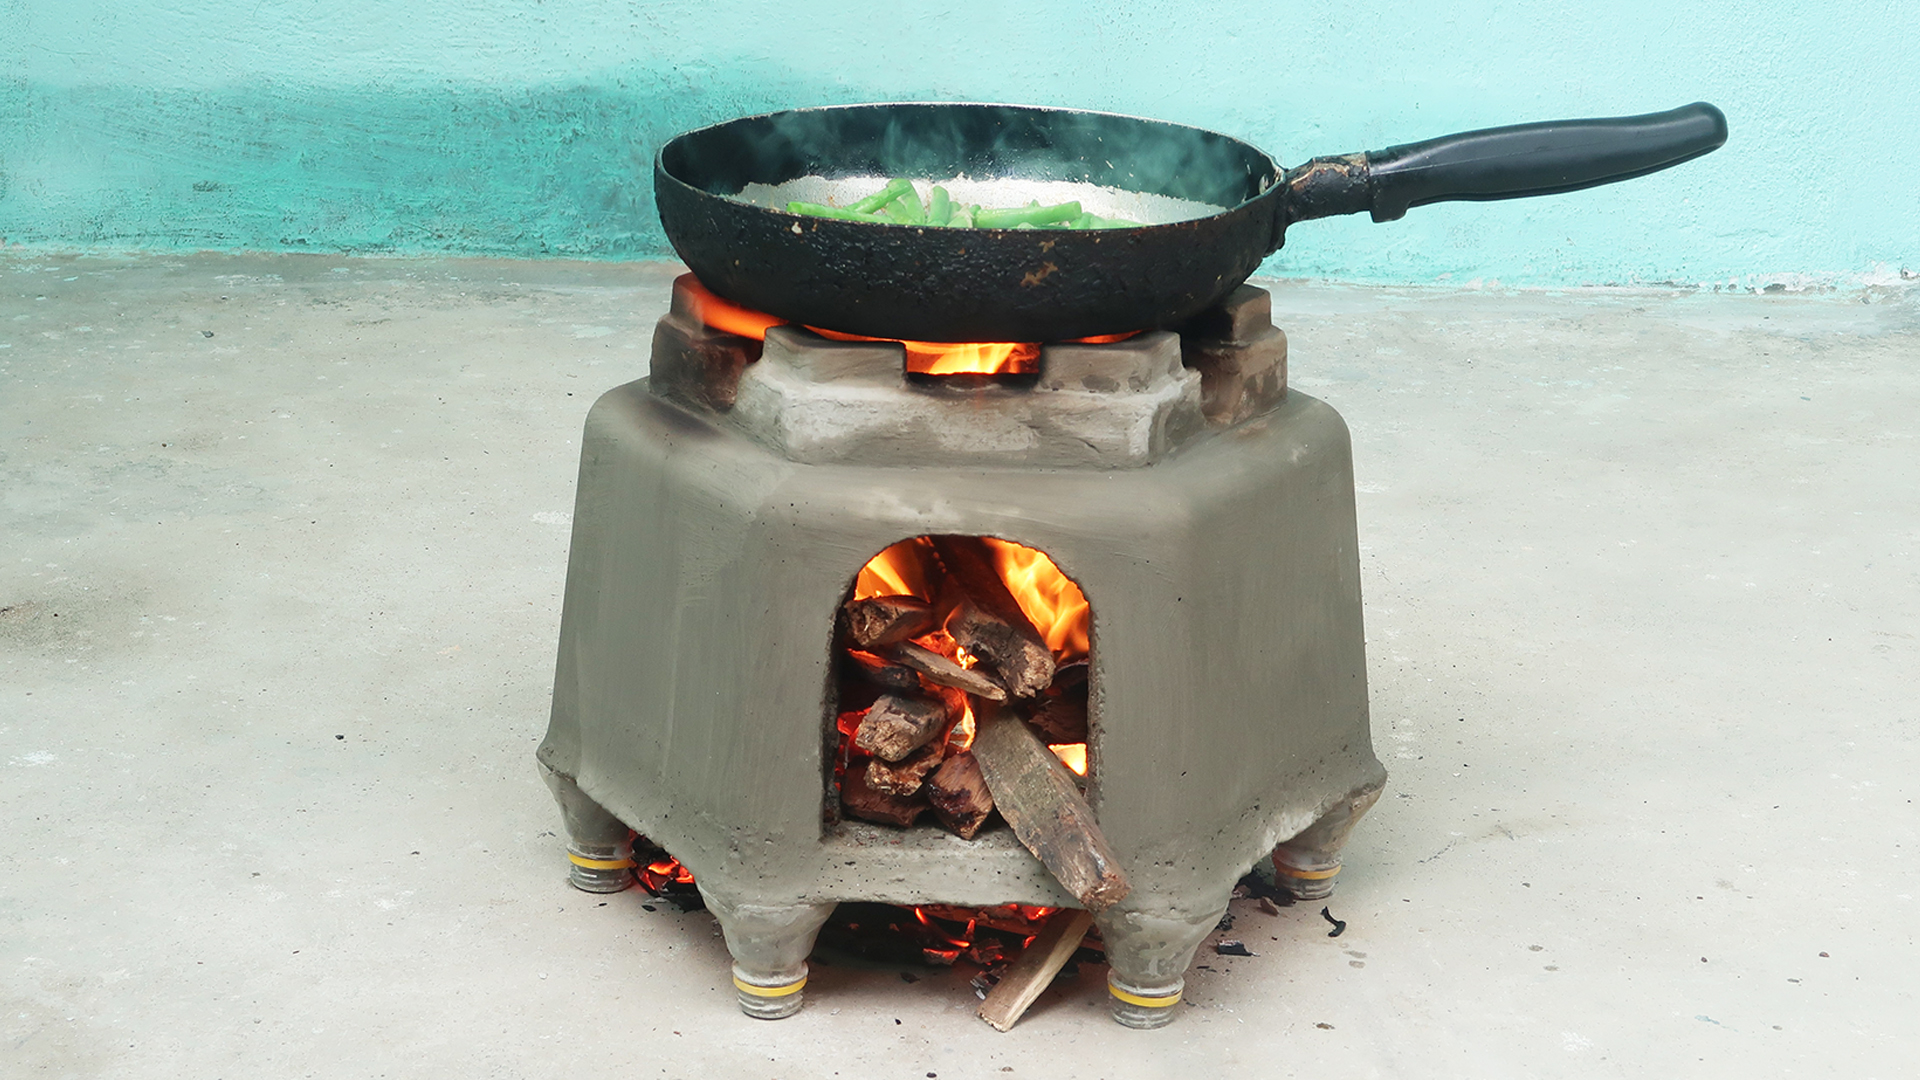 Creative Rocket Stove From Cement And Flower Pots | Self-Made Wood Stove Saves Firewood